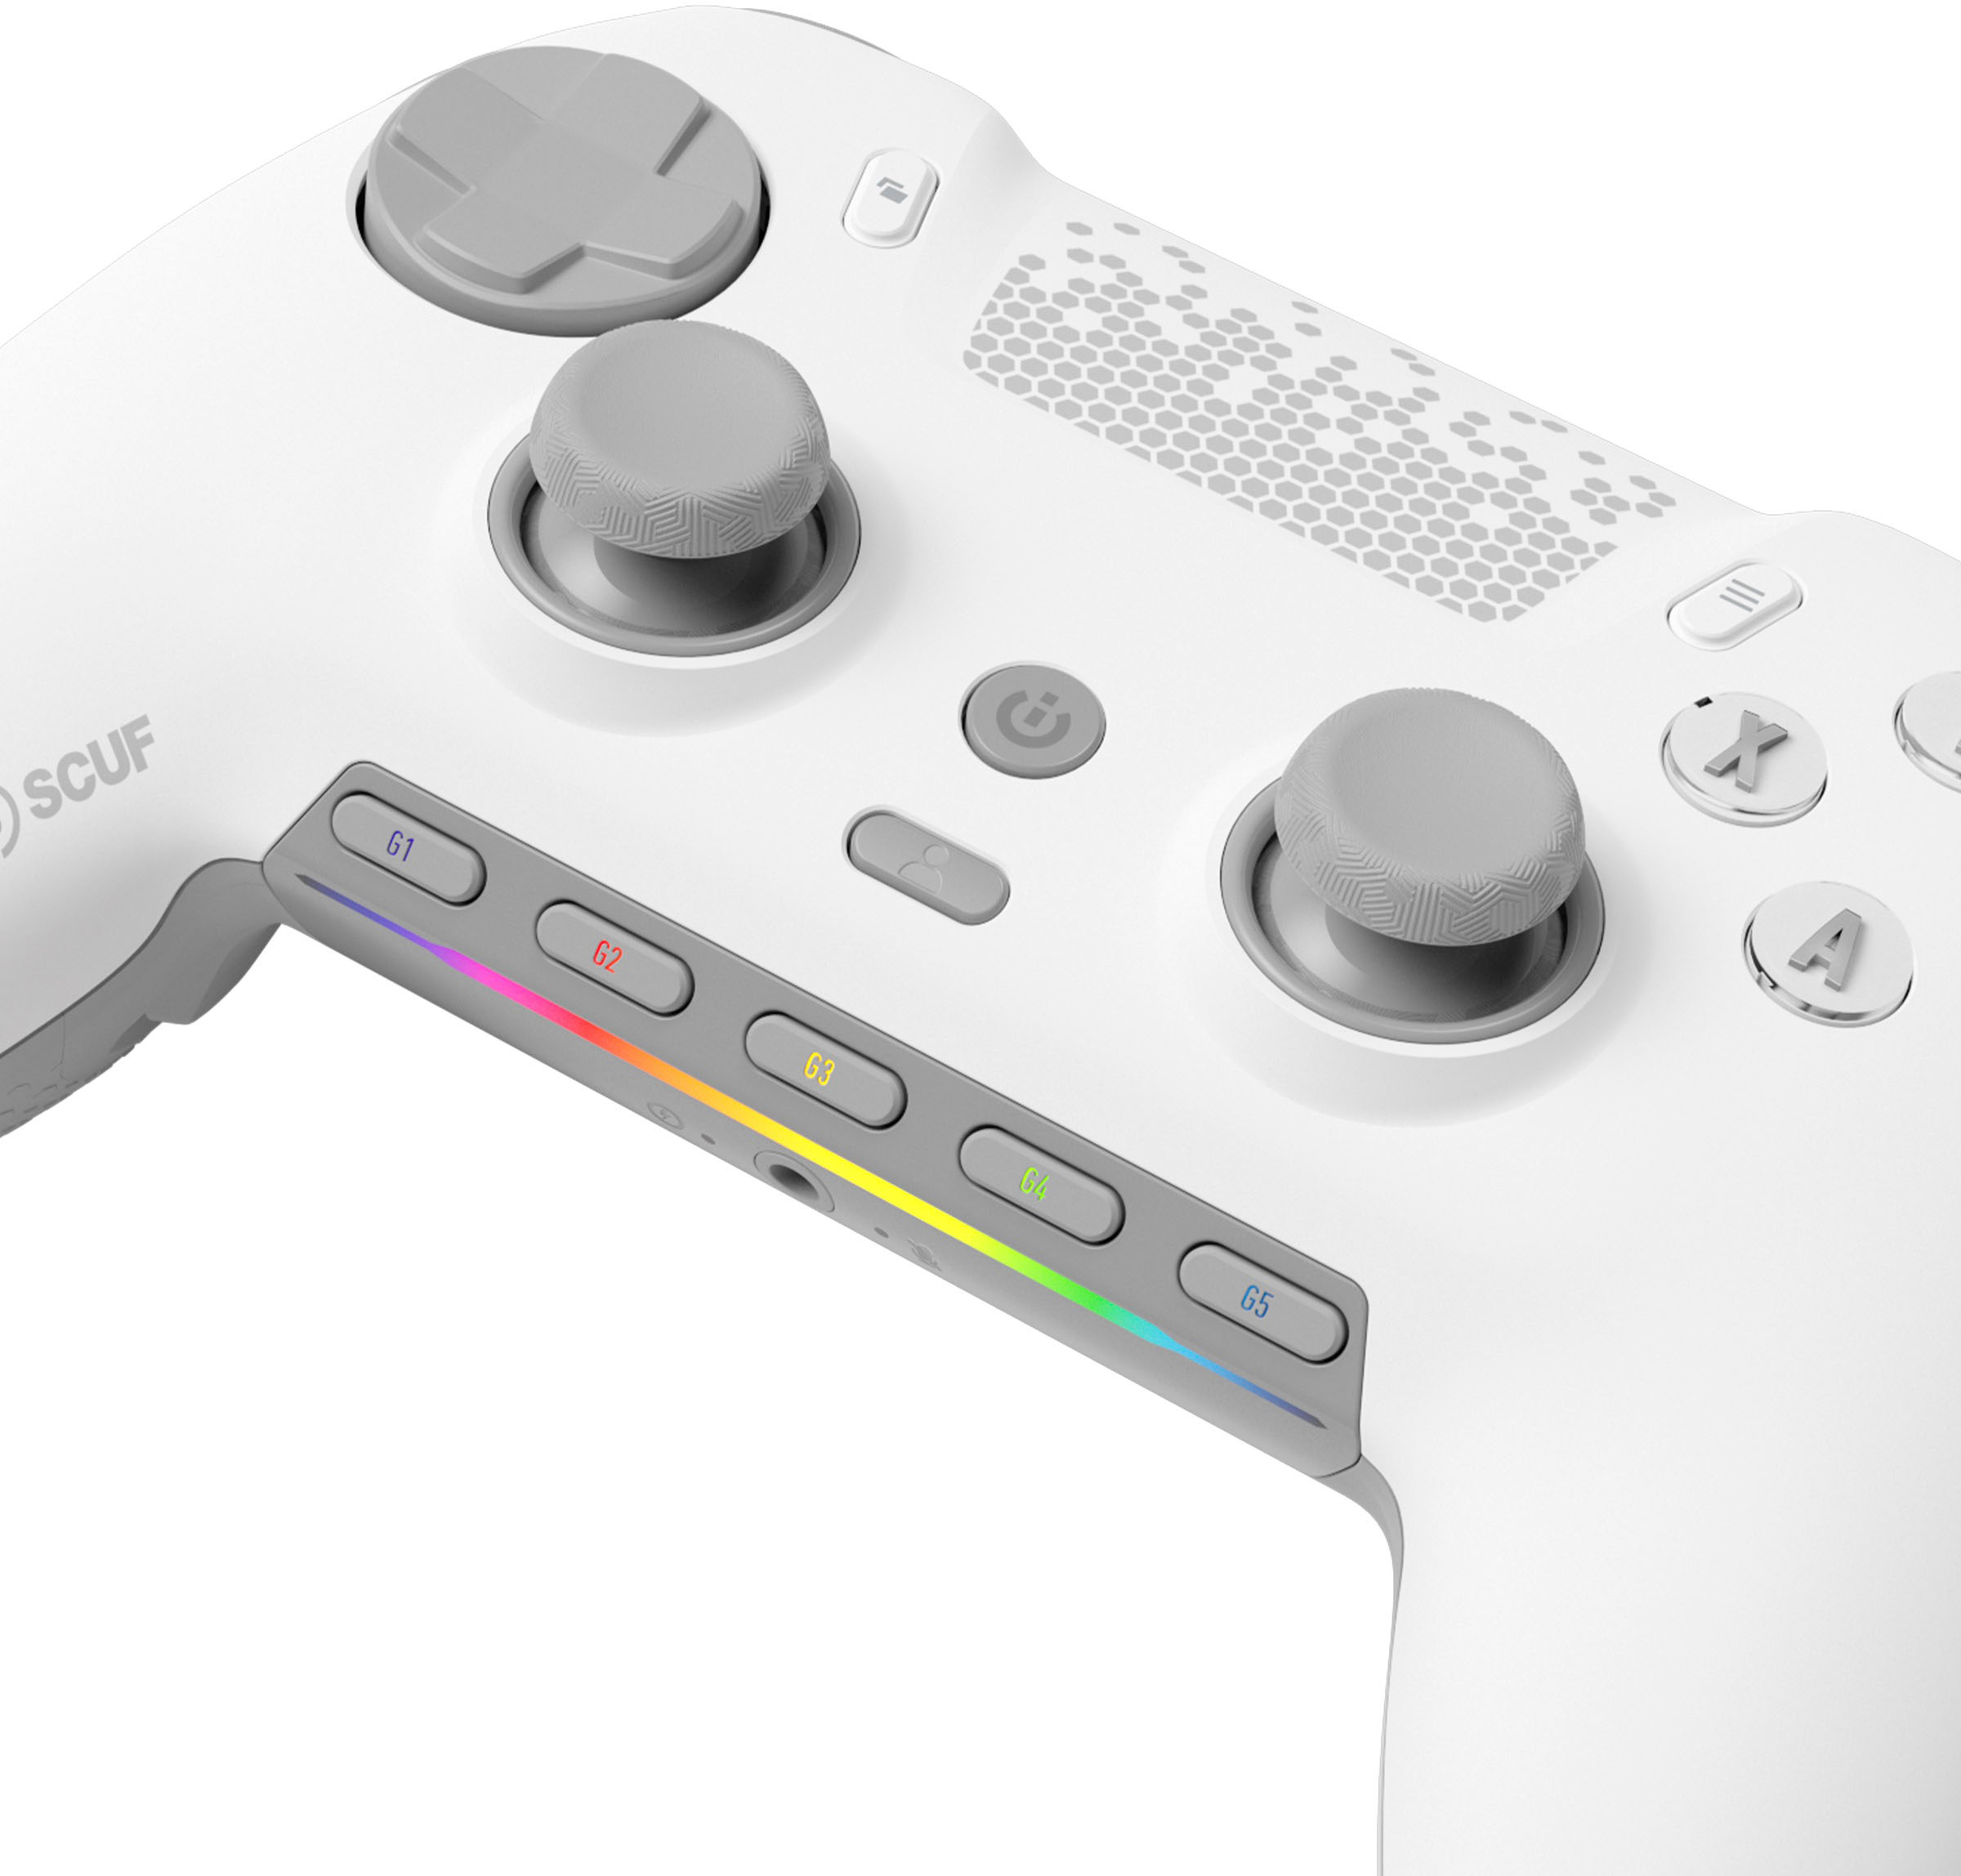 SCUF - Envision Pro Wireless Gaming Controller for PC - White